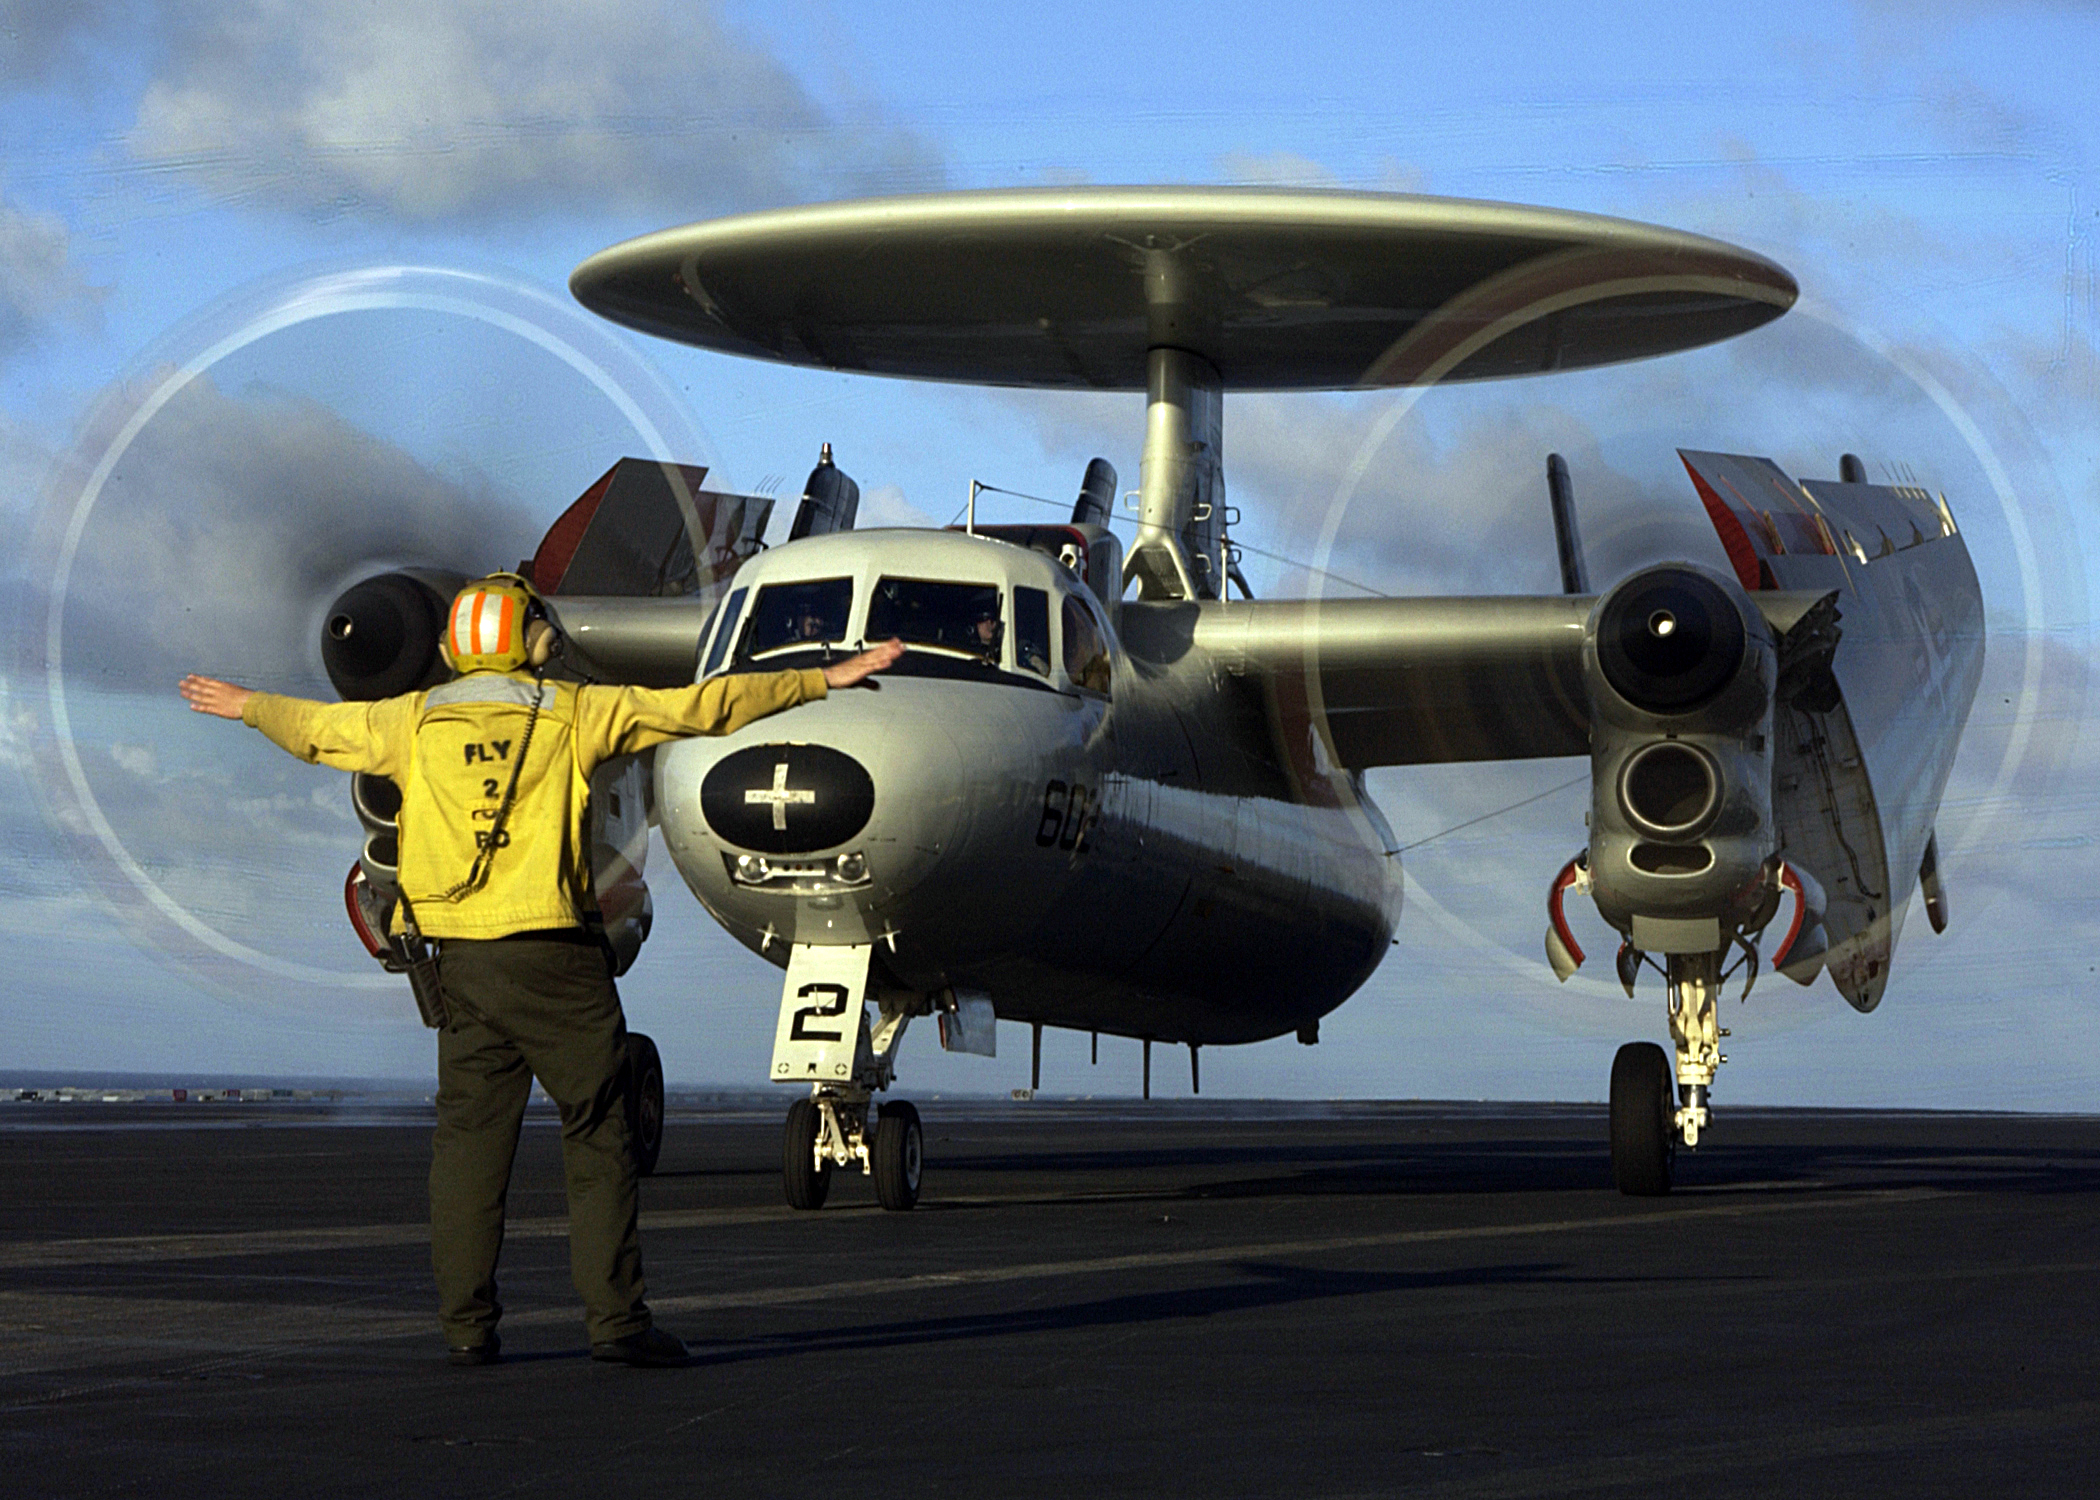 US Navy 050218-N-3241H-012 An Aviation Boatswain's Mate directs the pilots of an E-2C Hawkeye after a safe recovery during flight operations aboard the Nimitz-class aircraft carrier USS Carl Vinson (CVN 70)